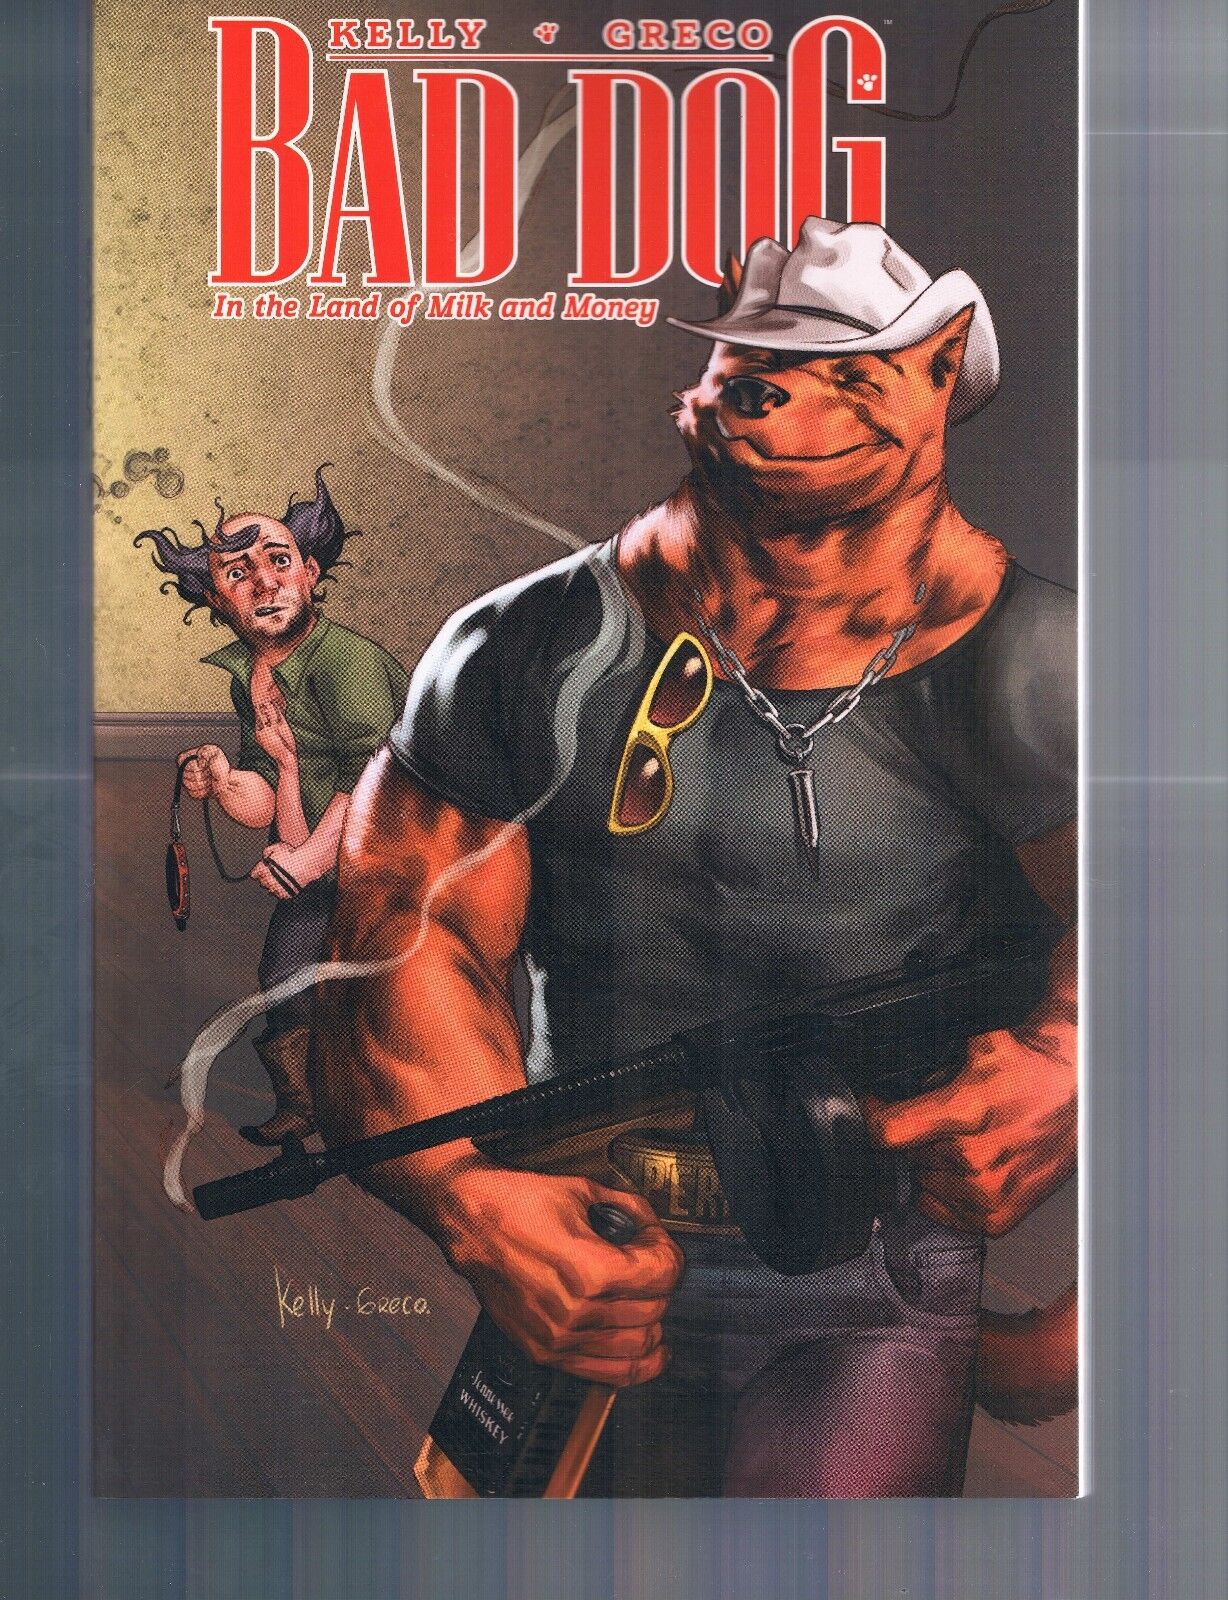 Bad Dog Vol 1: In the Land of Milk & Money by Joe Kelly & Diego Greco TPB 2014